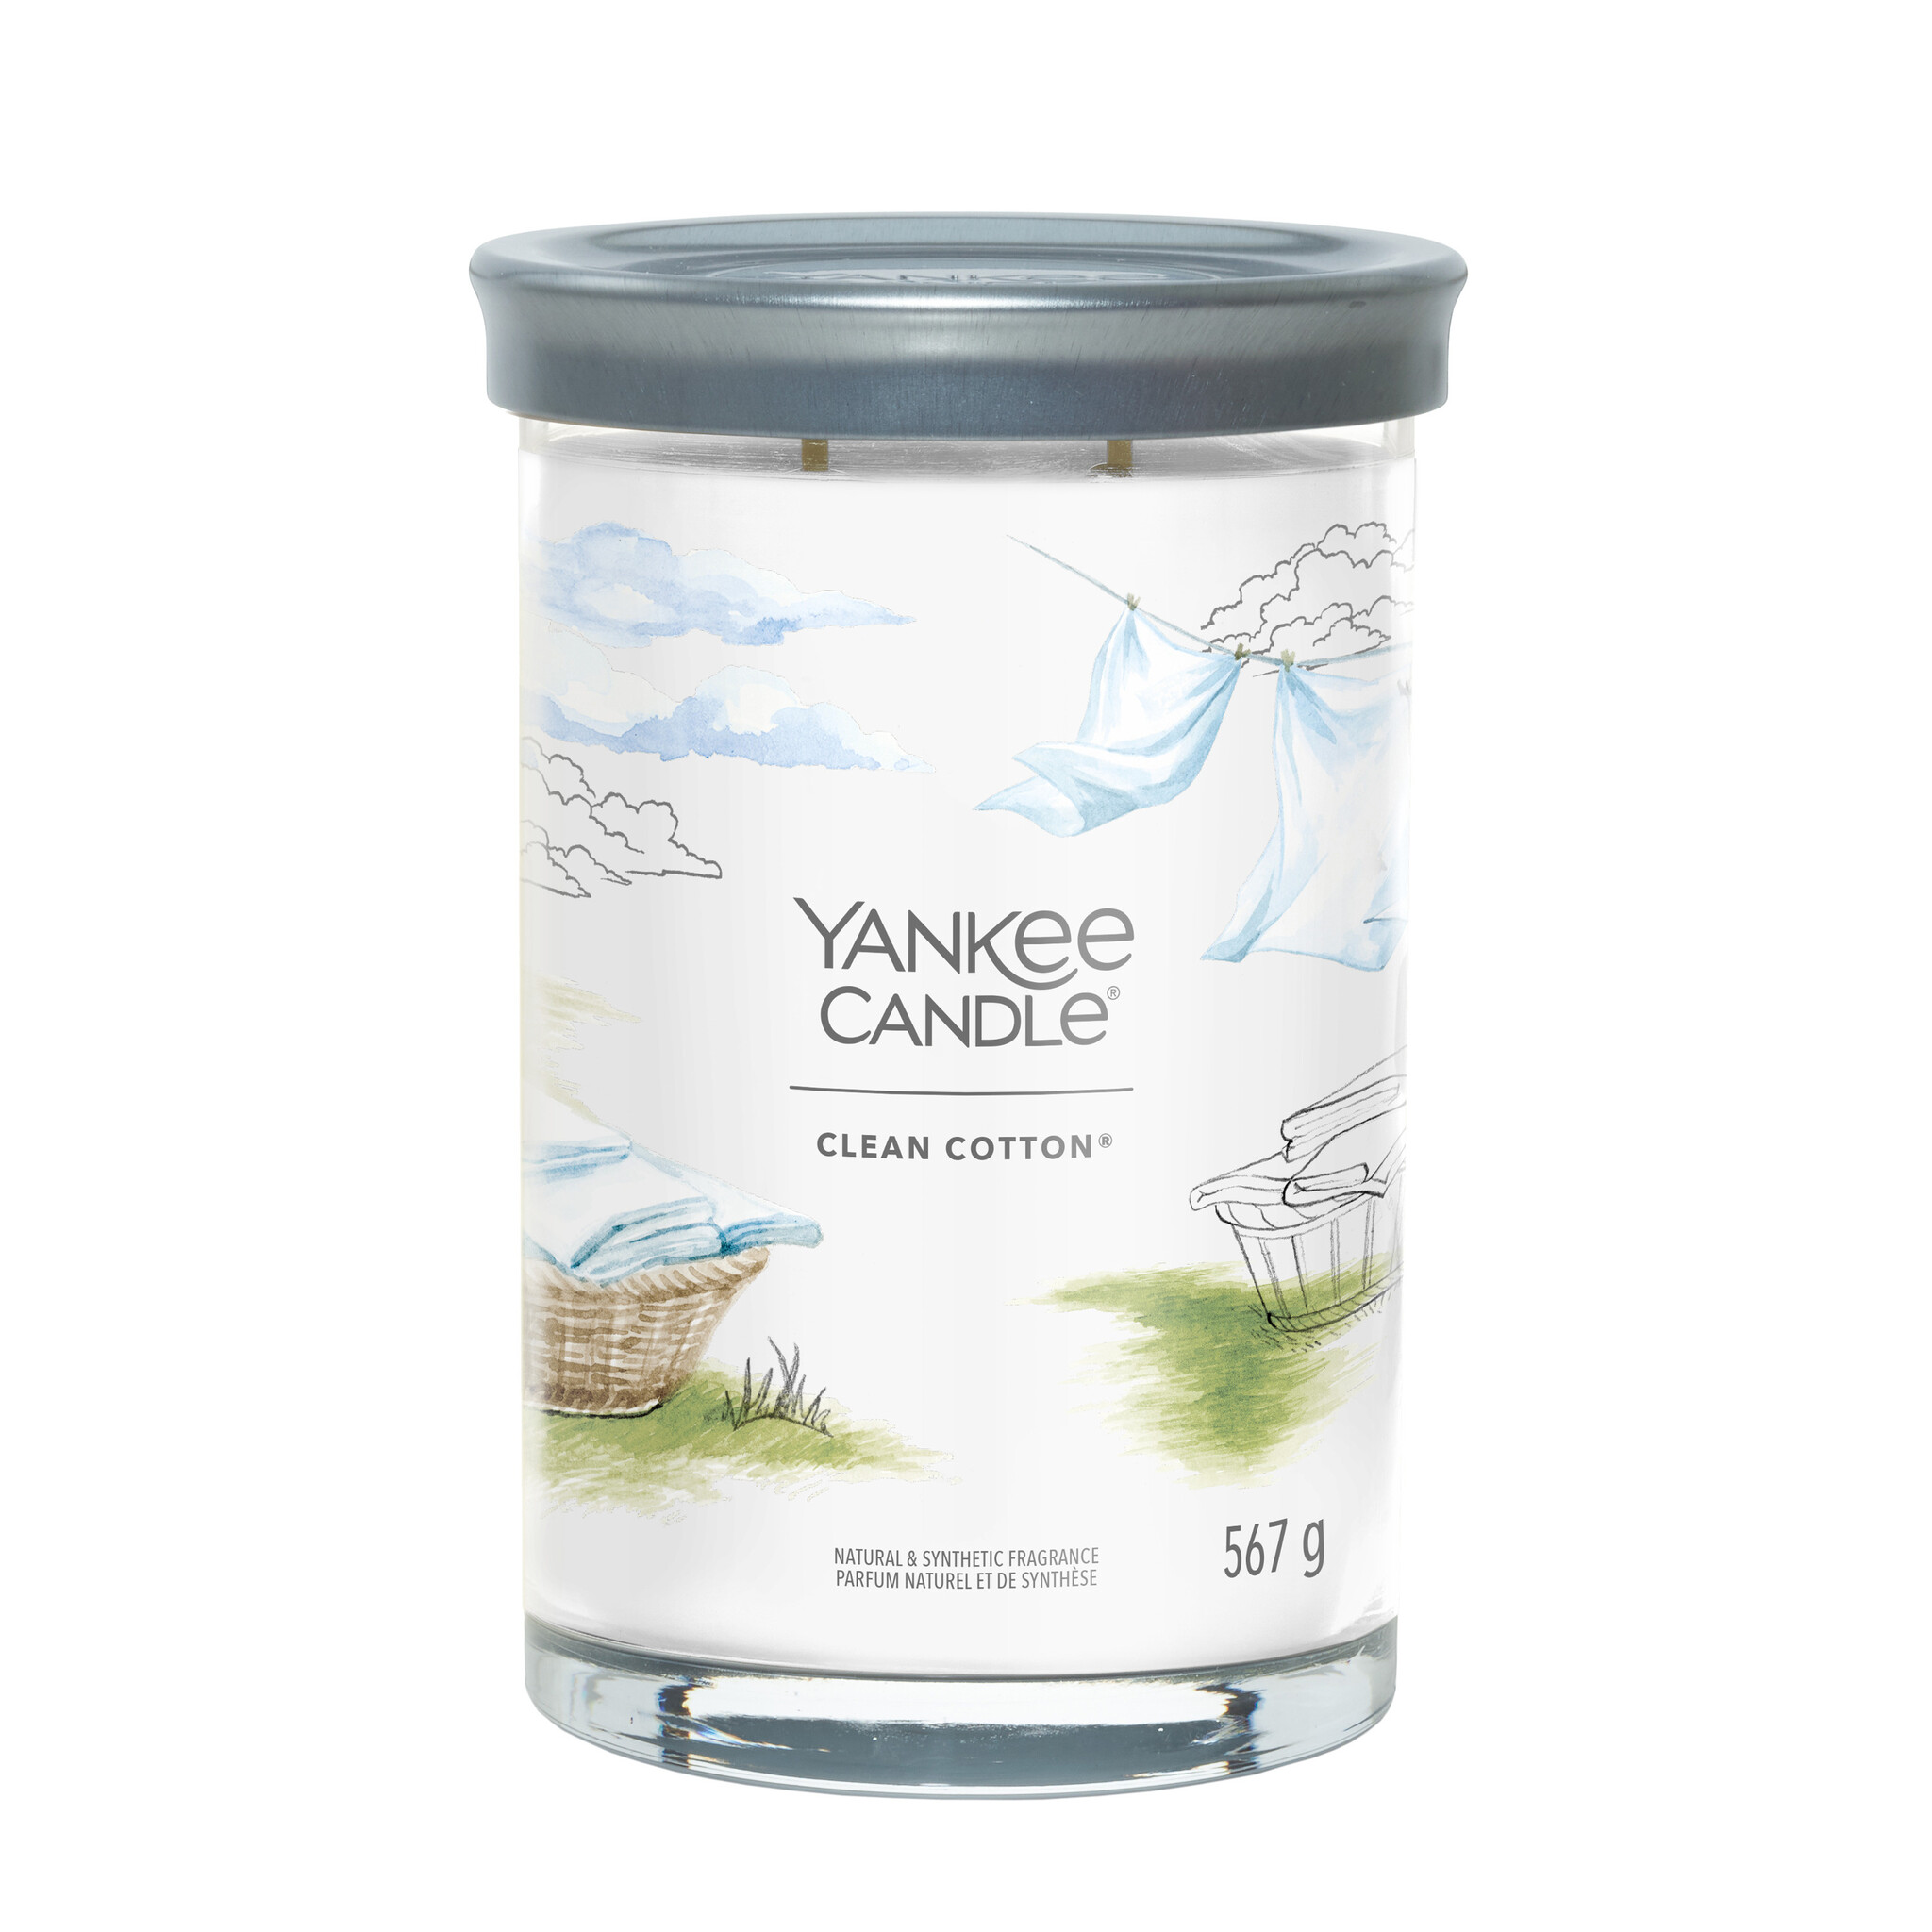 Yankee Candle - Clean Cotton Large Tumbler